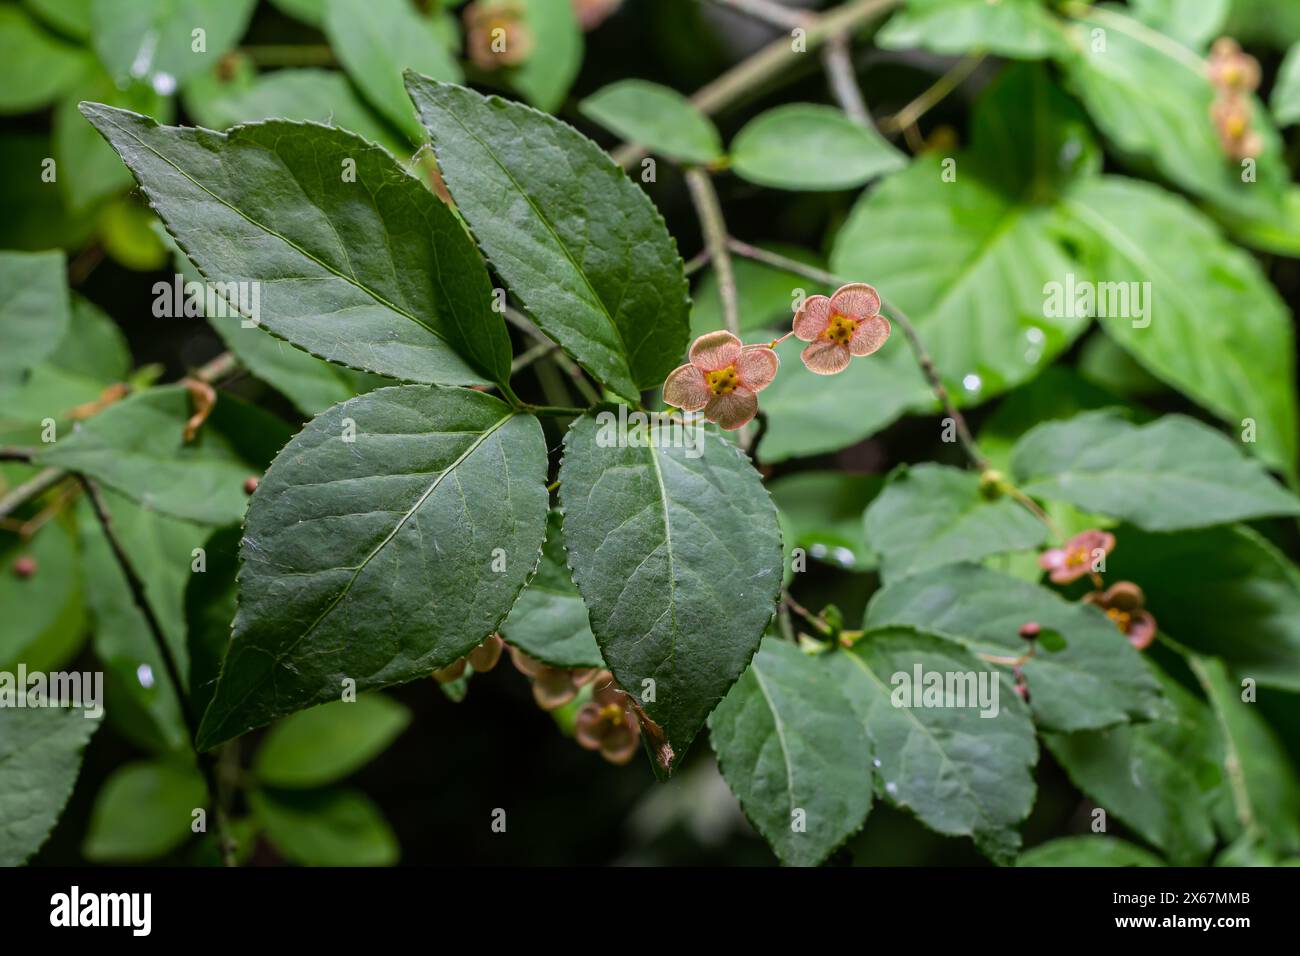 Little flowers of Euonymus verrucosus or spindle tree. Stock Photo